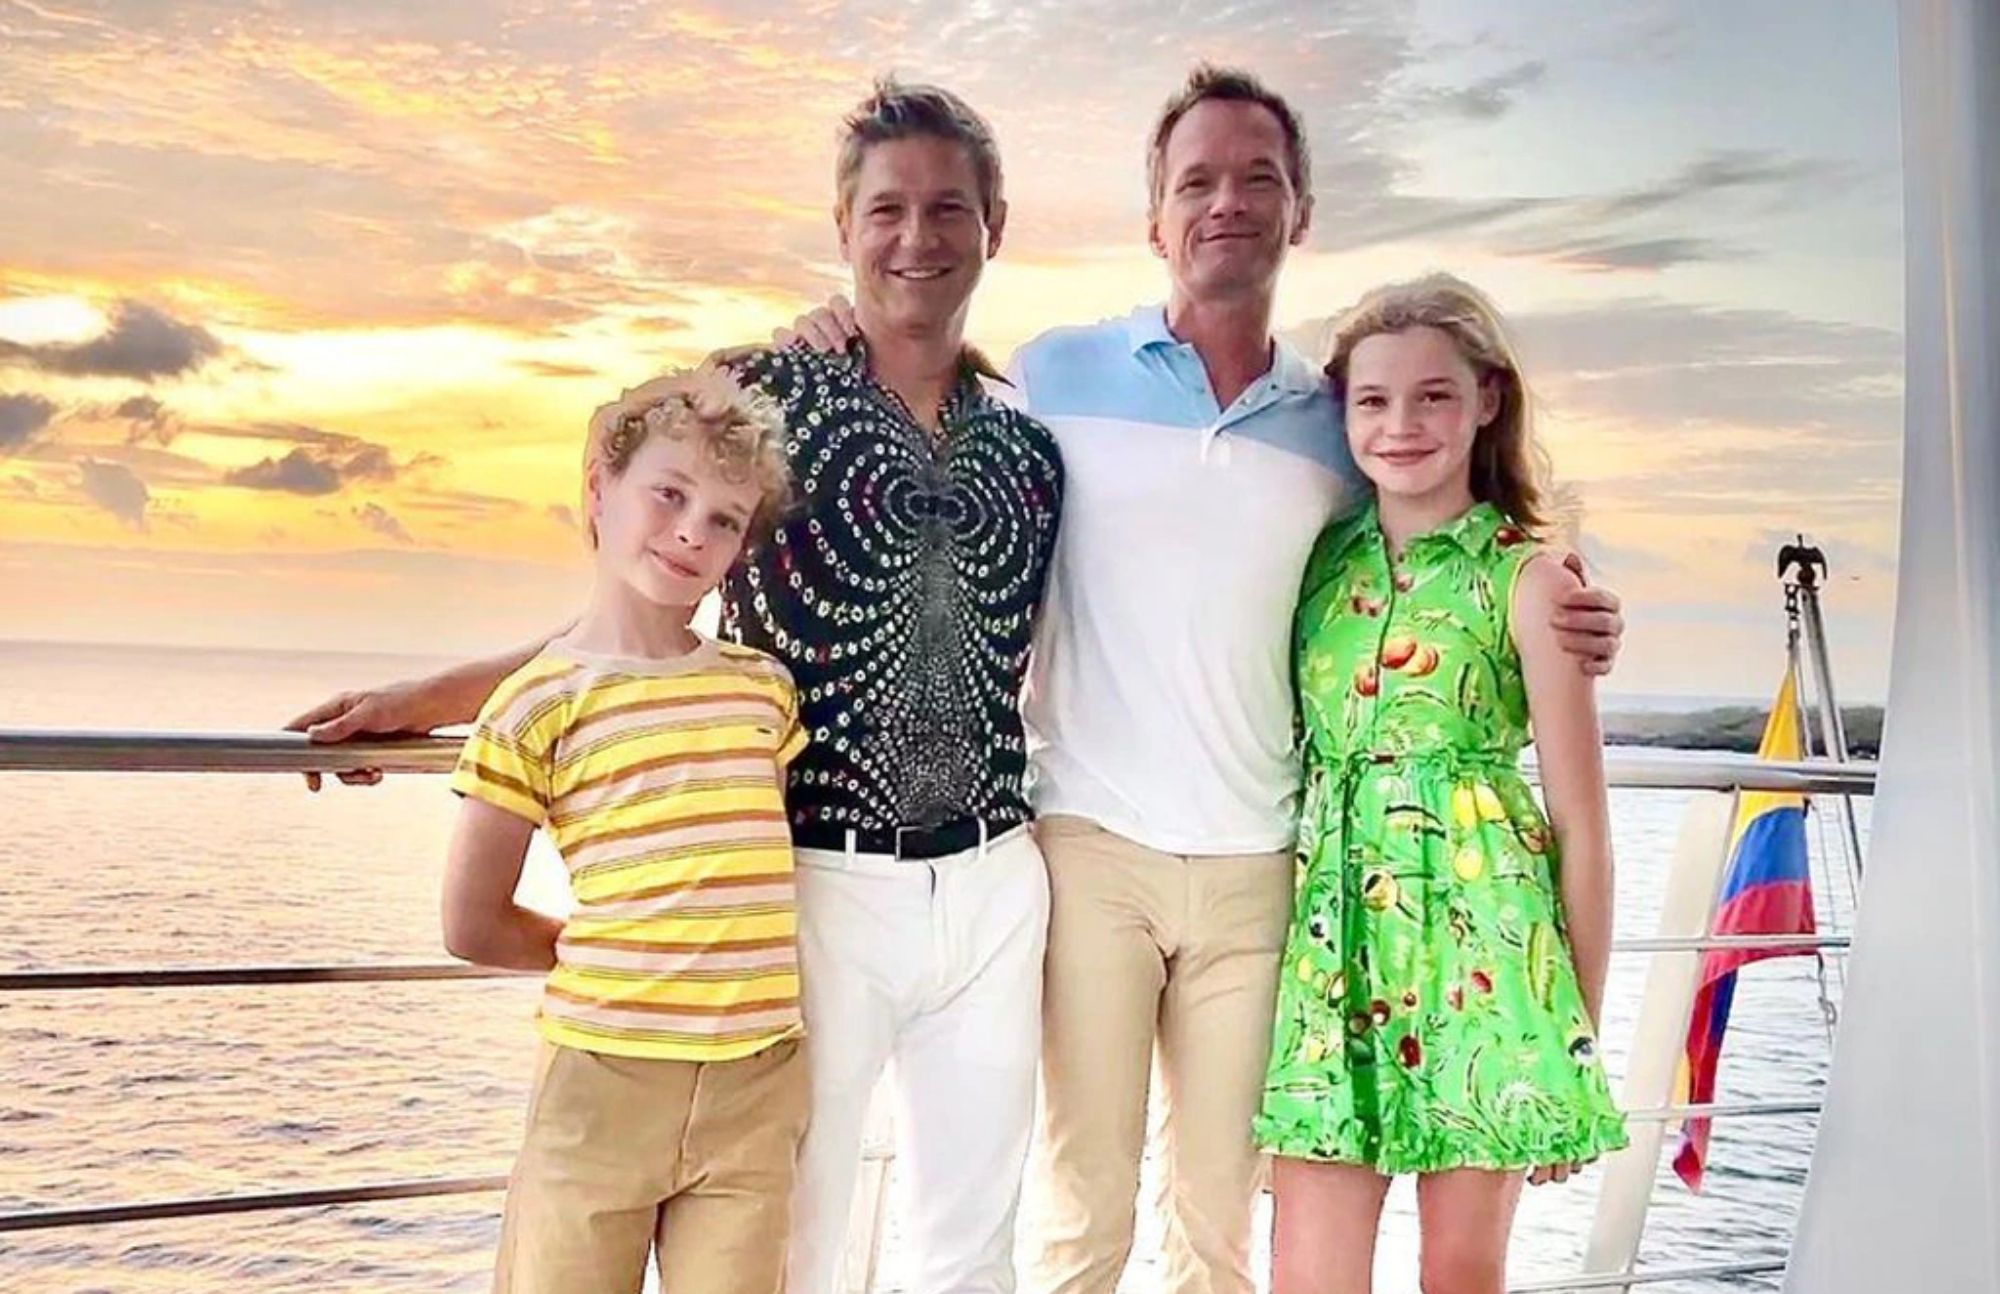 The water is seen in the background as Niel Patrick Harris and her husband David Burtkafa smile for the camera with their surrogate children